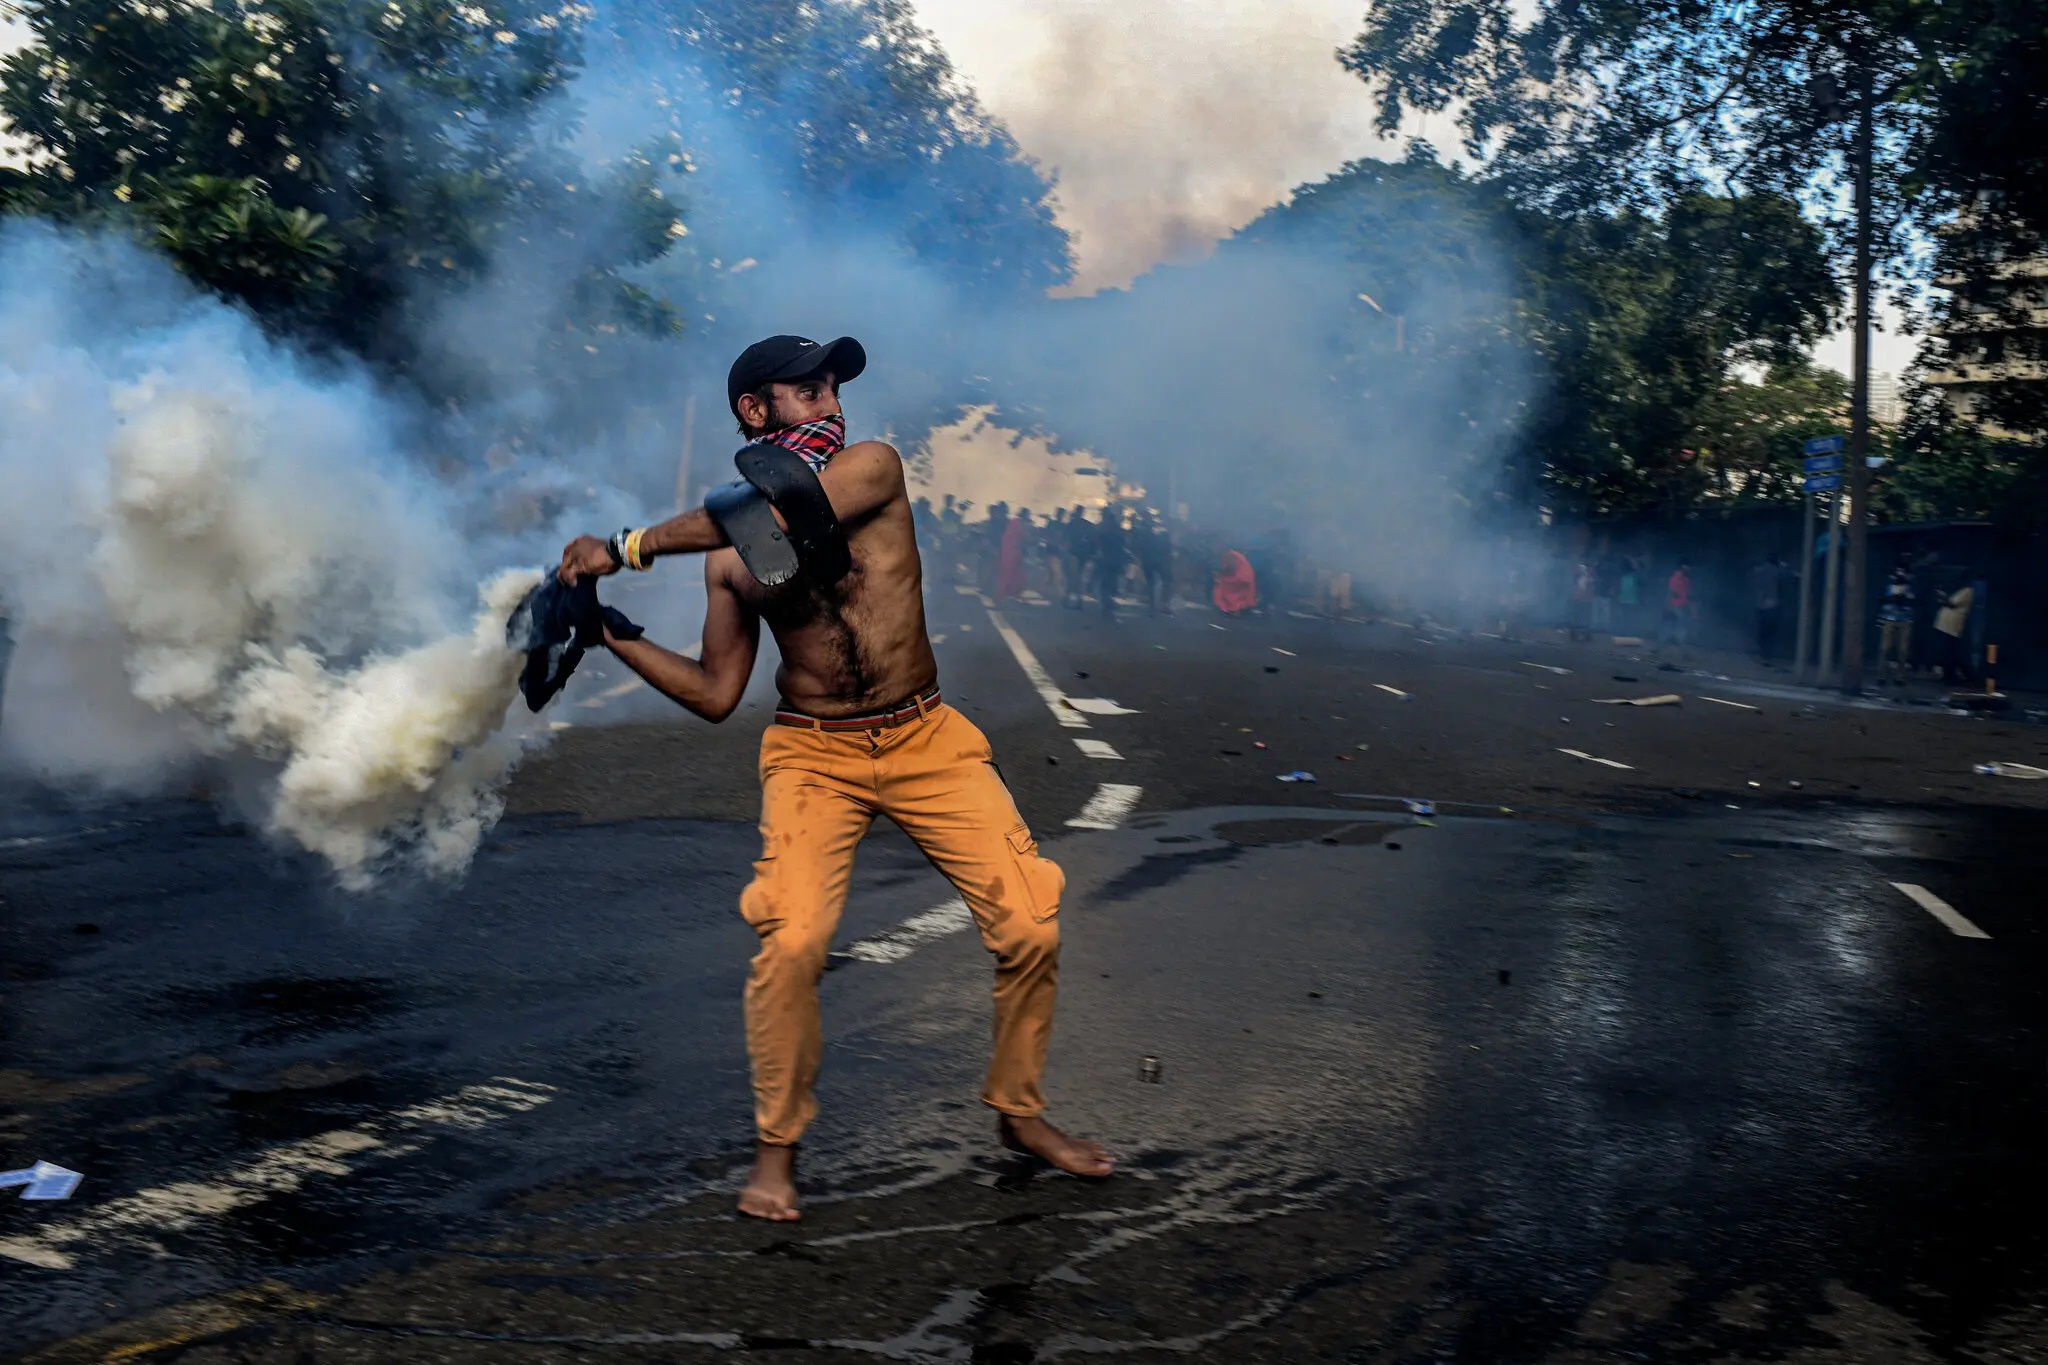 A protester in Sri Lanka hurls a tear-gas canister back at the police officers who fired it, 19 May 2022. Photo: Atul Loke / The New York Times